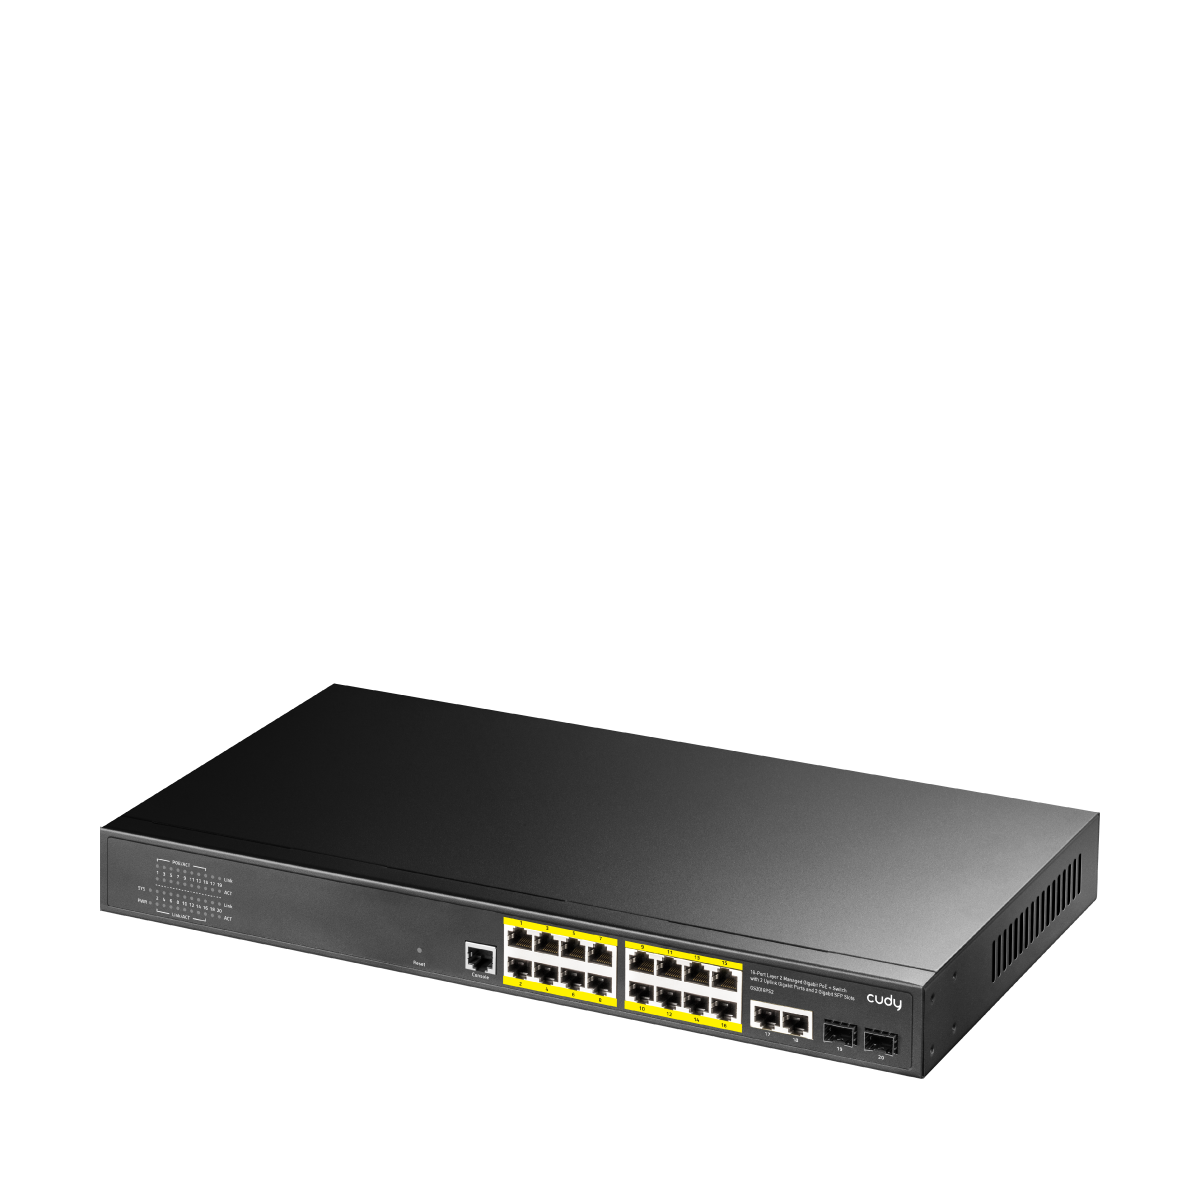 16-GbE PoE L2 Managed Switch with 2-GbE and 2-SFP, GS2018PS2 1.0